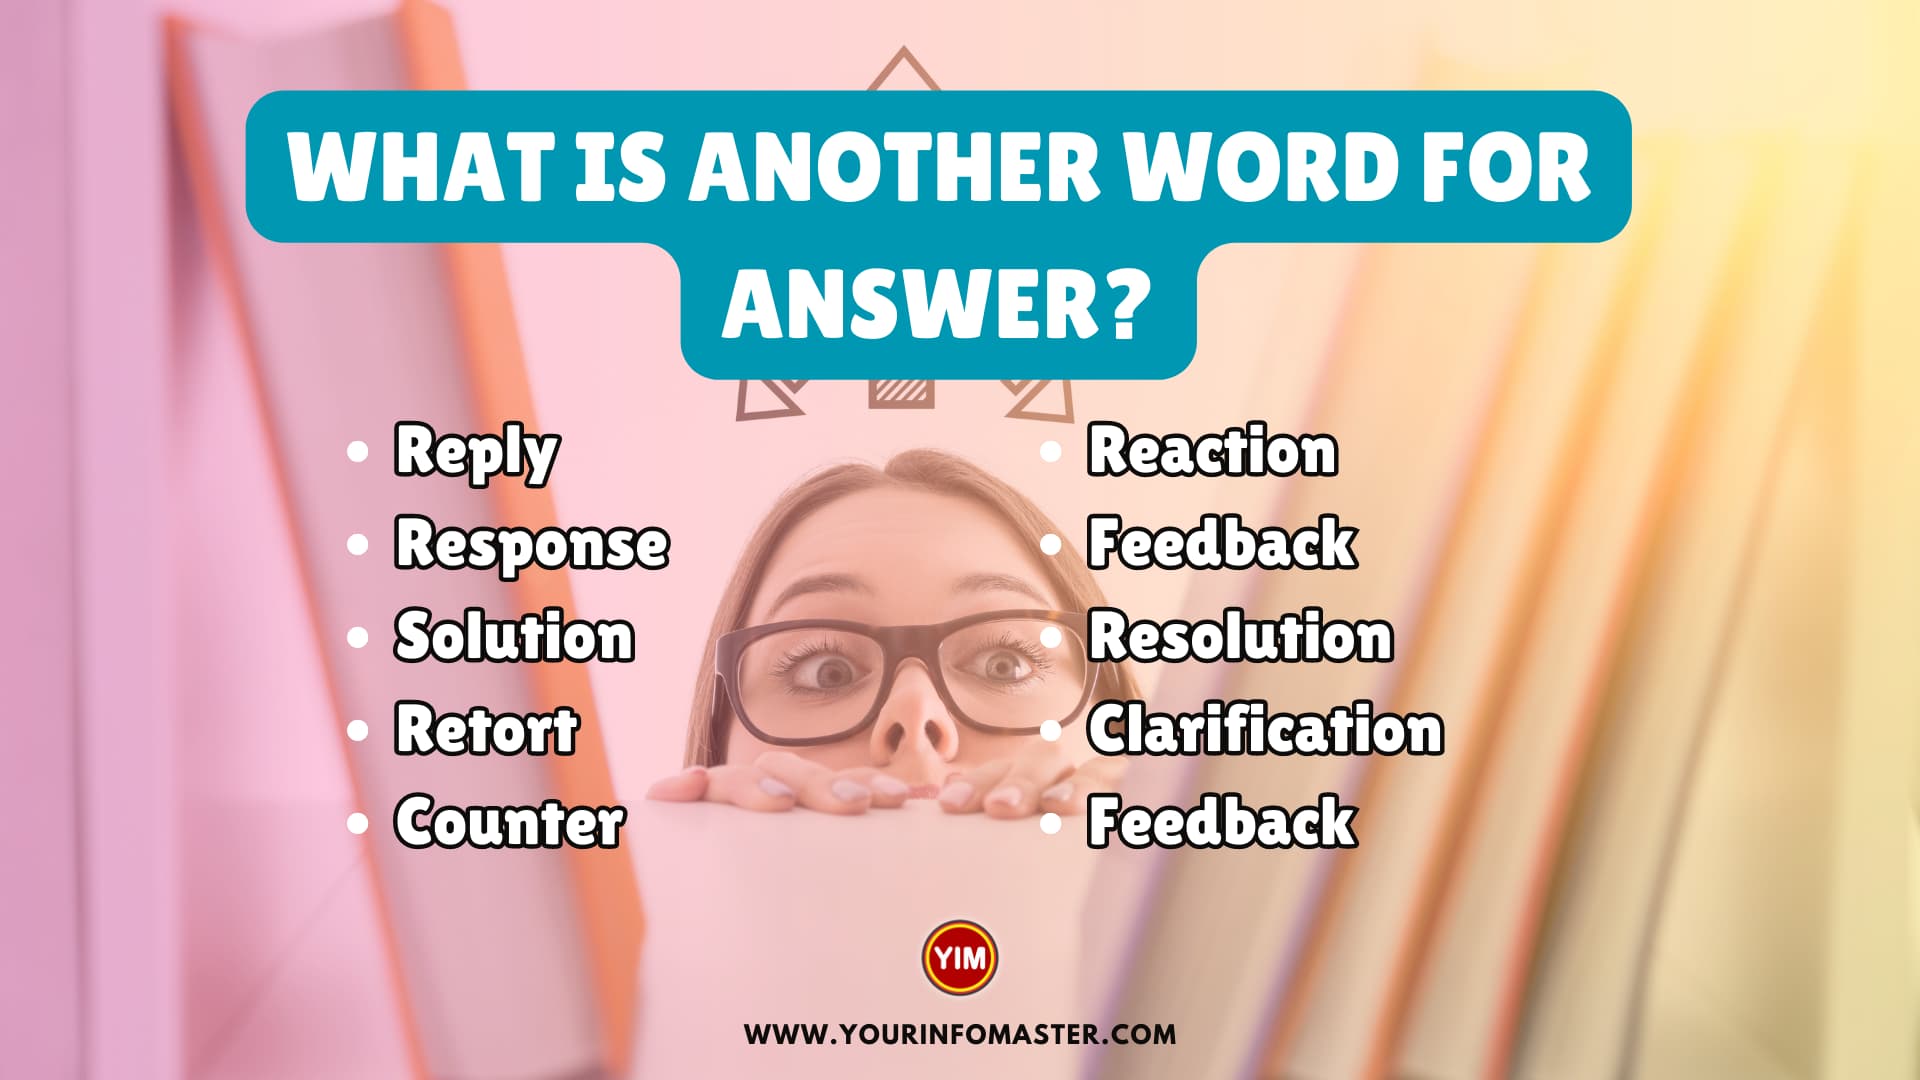 What is another word for Answer